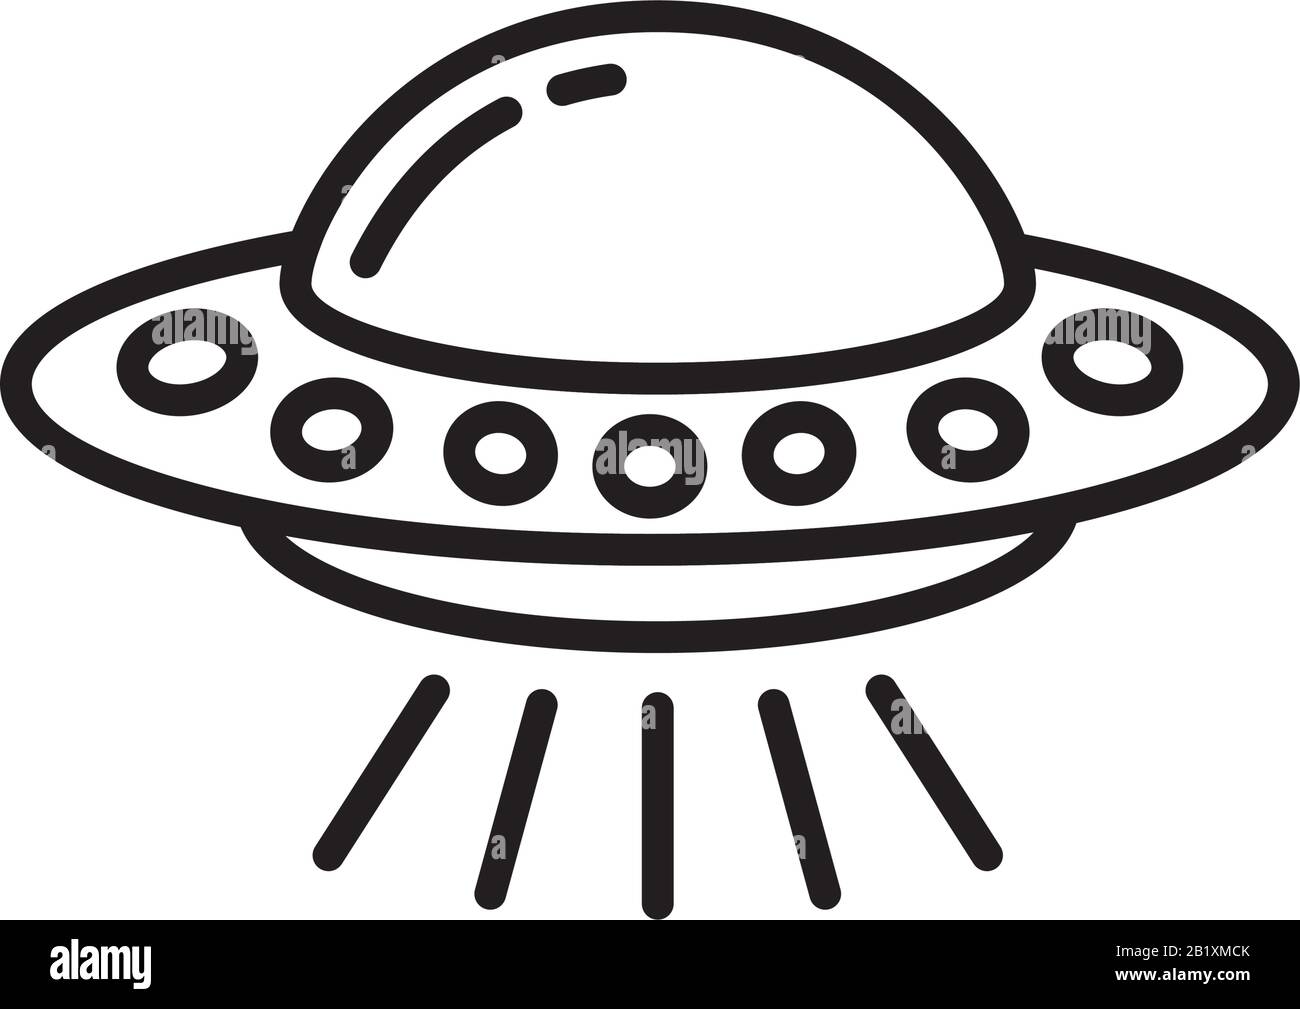 Download UFO VPN 3.5.0 for Android free | Uptodown.com